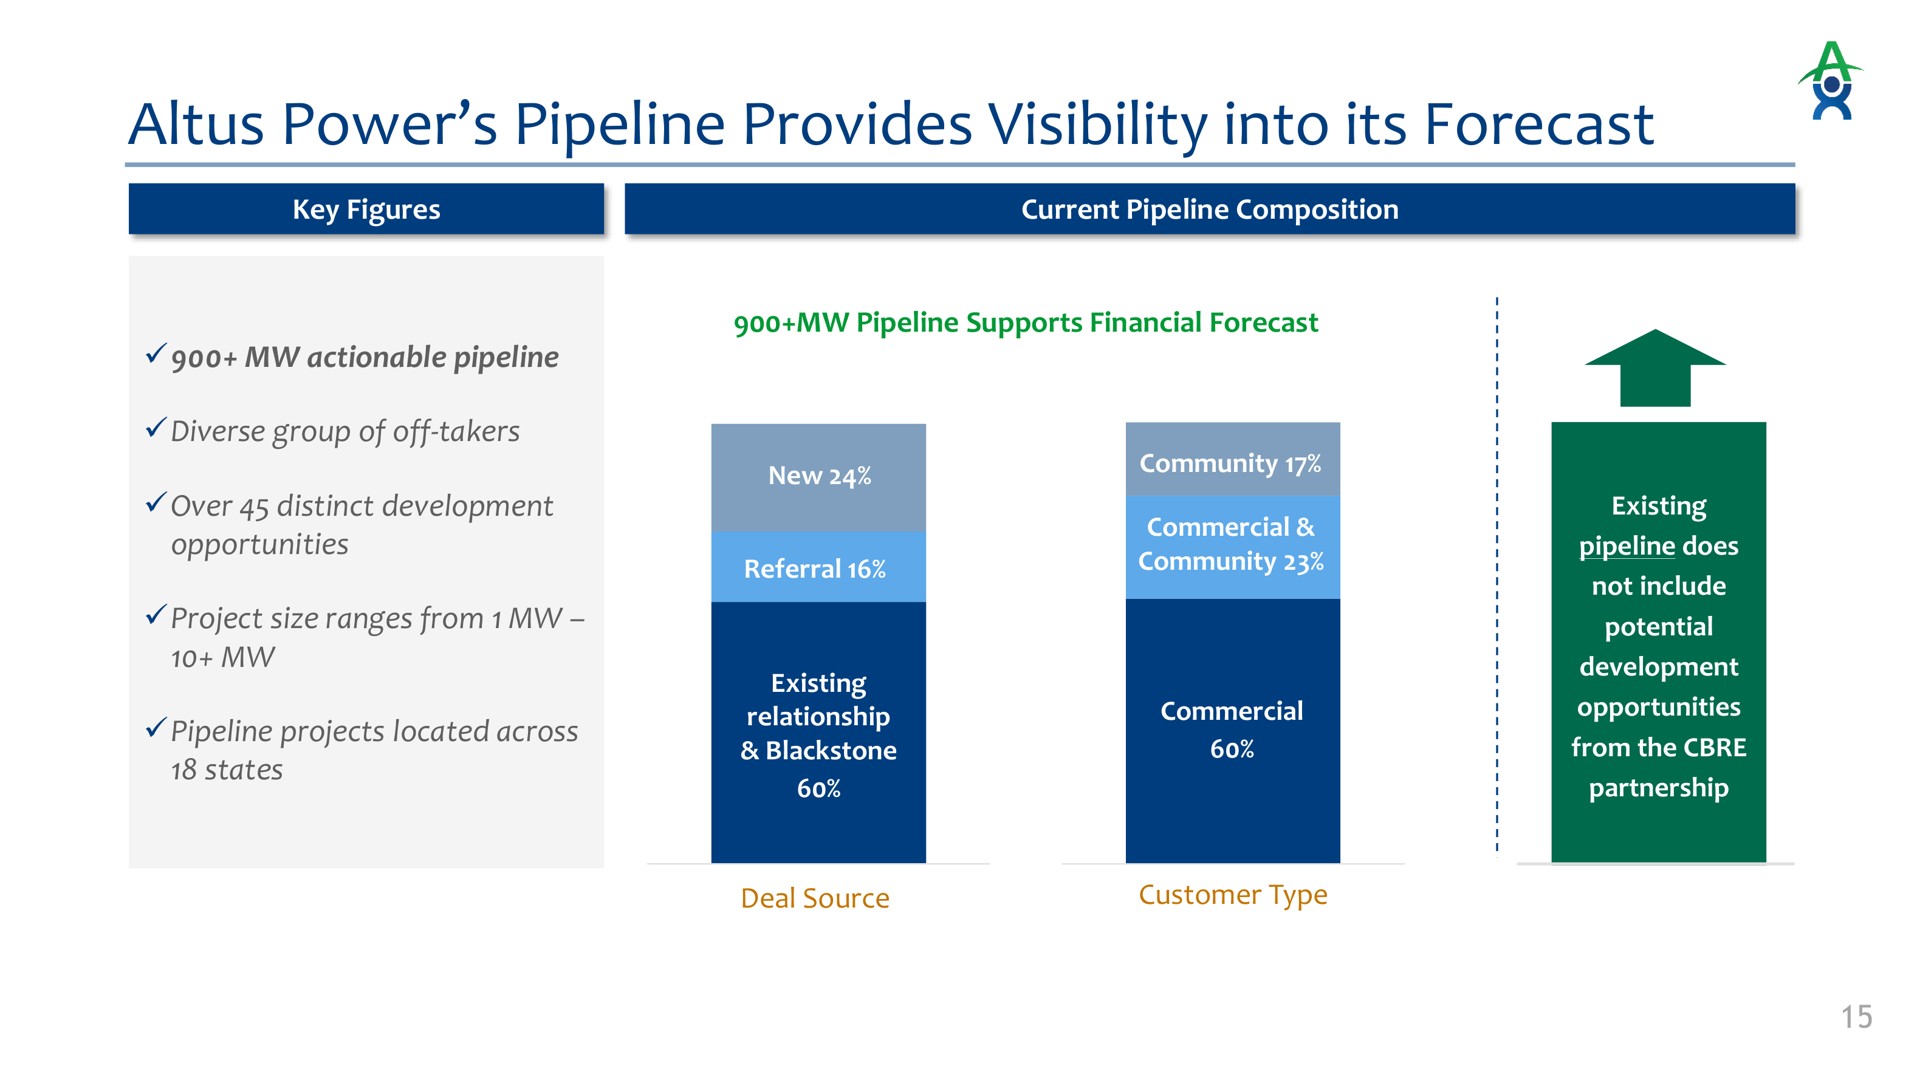 power pipeline provides visibility into its forecast | Altus Power